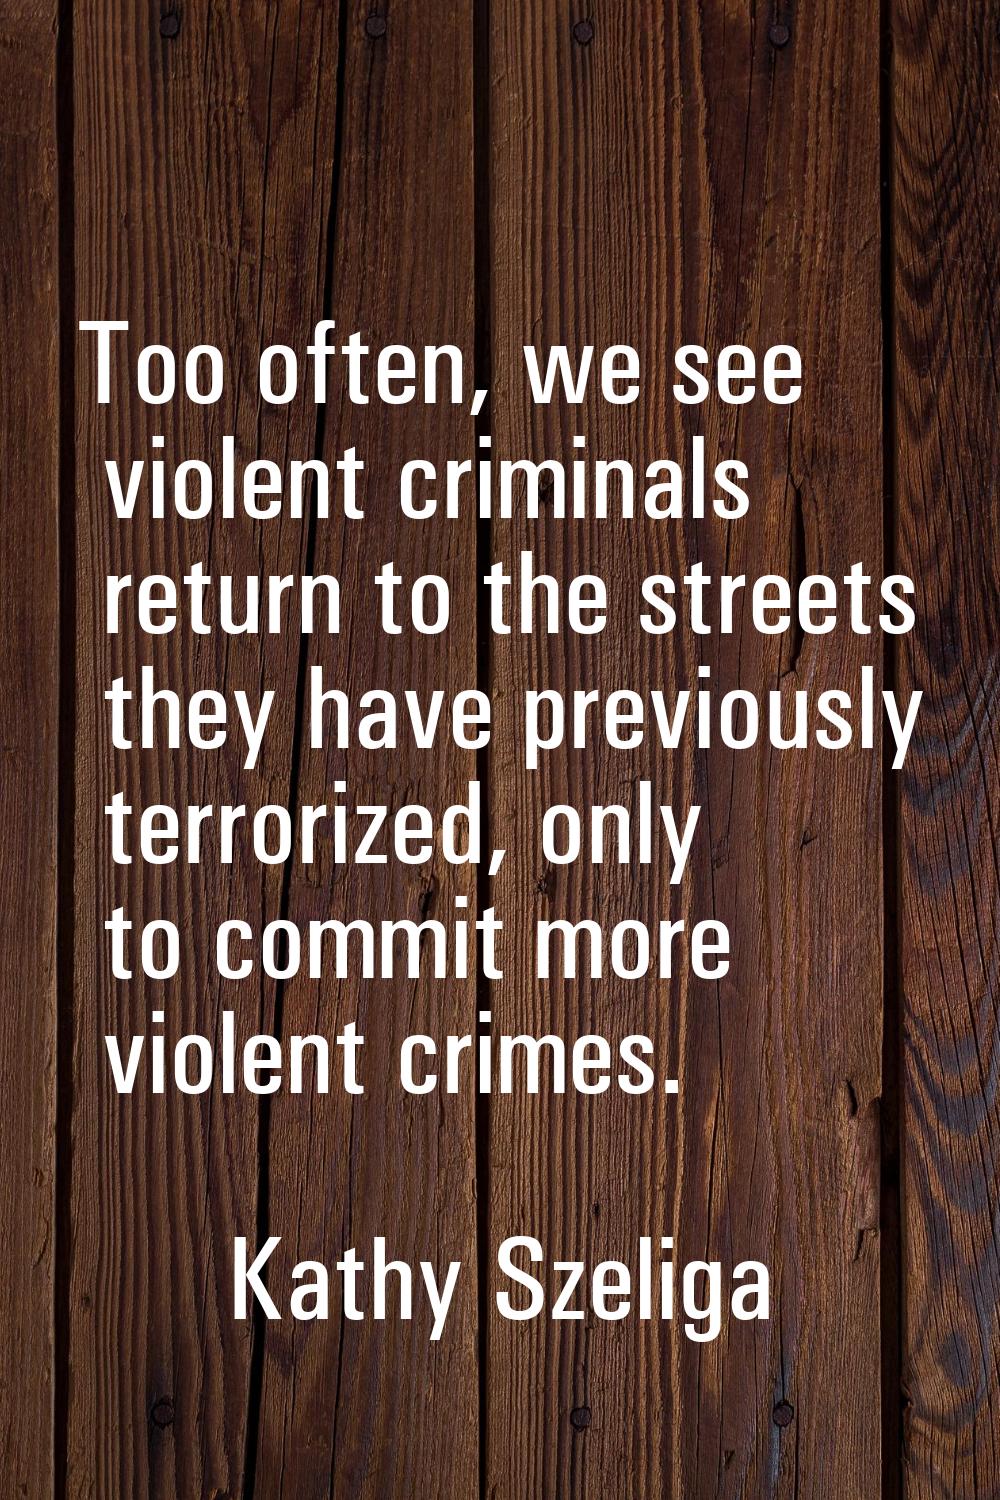 Too often, we see violent criminals return to the streets they have previously terrorized, only to 